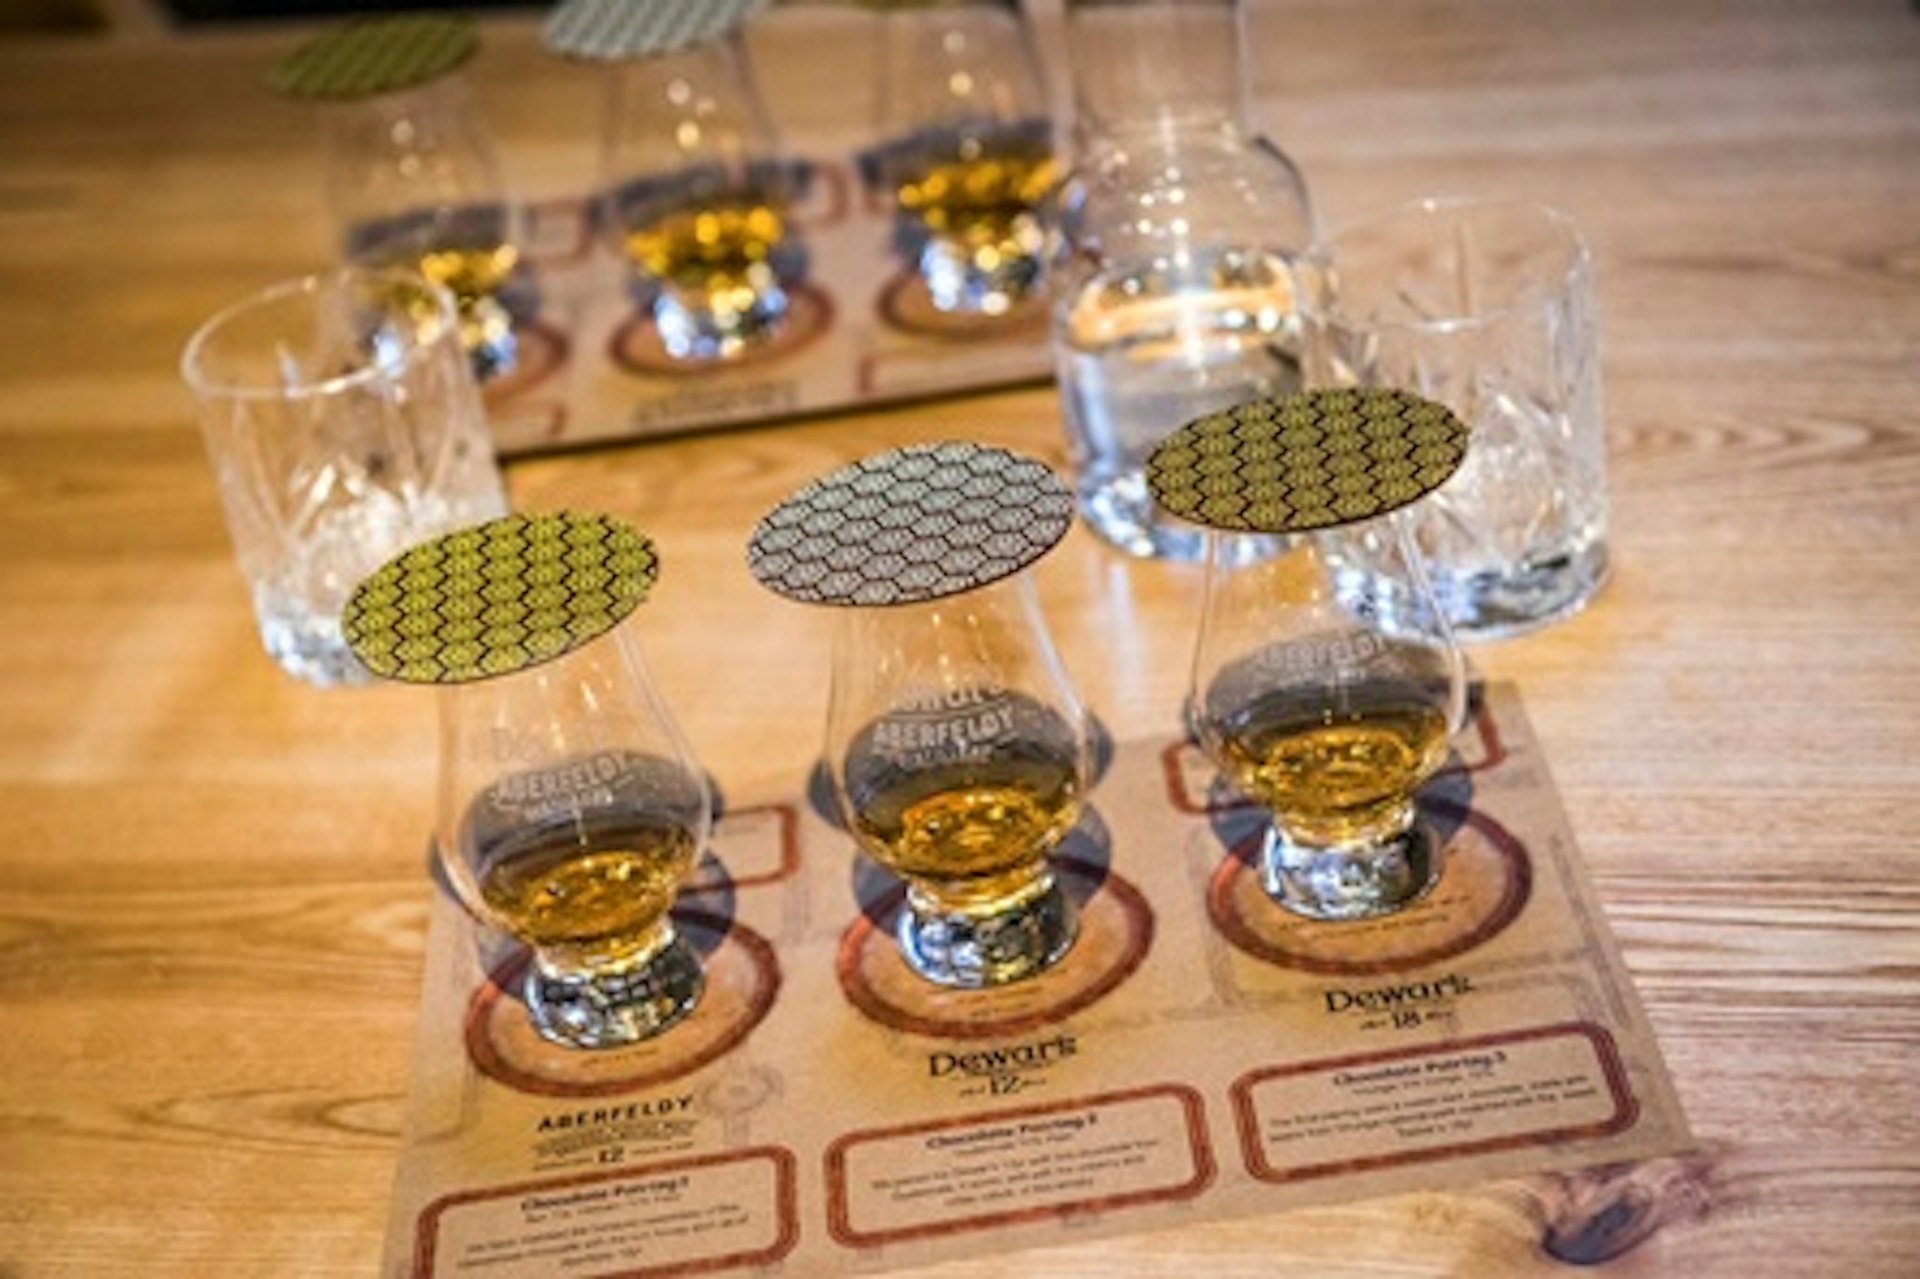 Dewar's Aberfeldy Distillery Tour with Whisky and Chocolate Tasting for Two 3